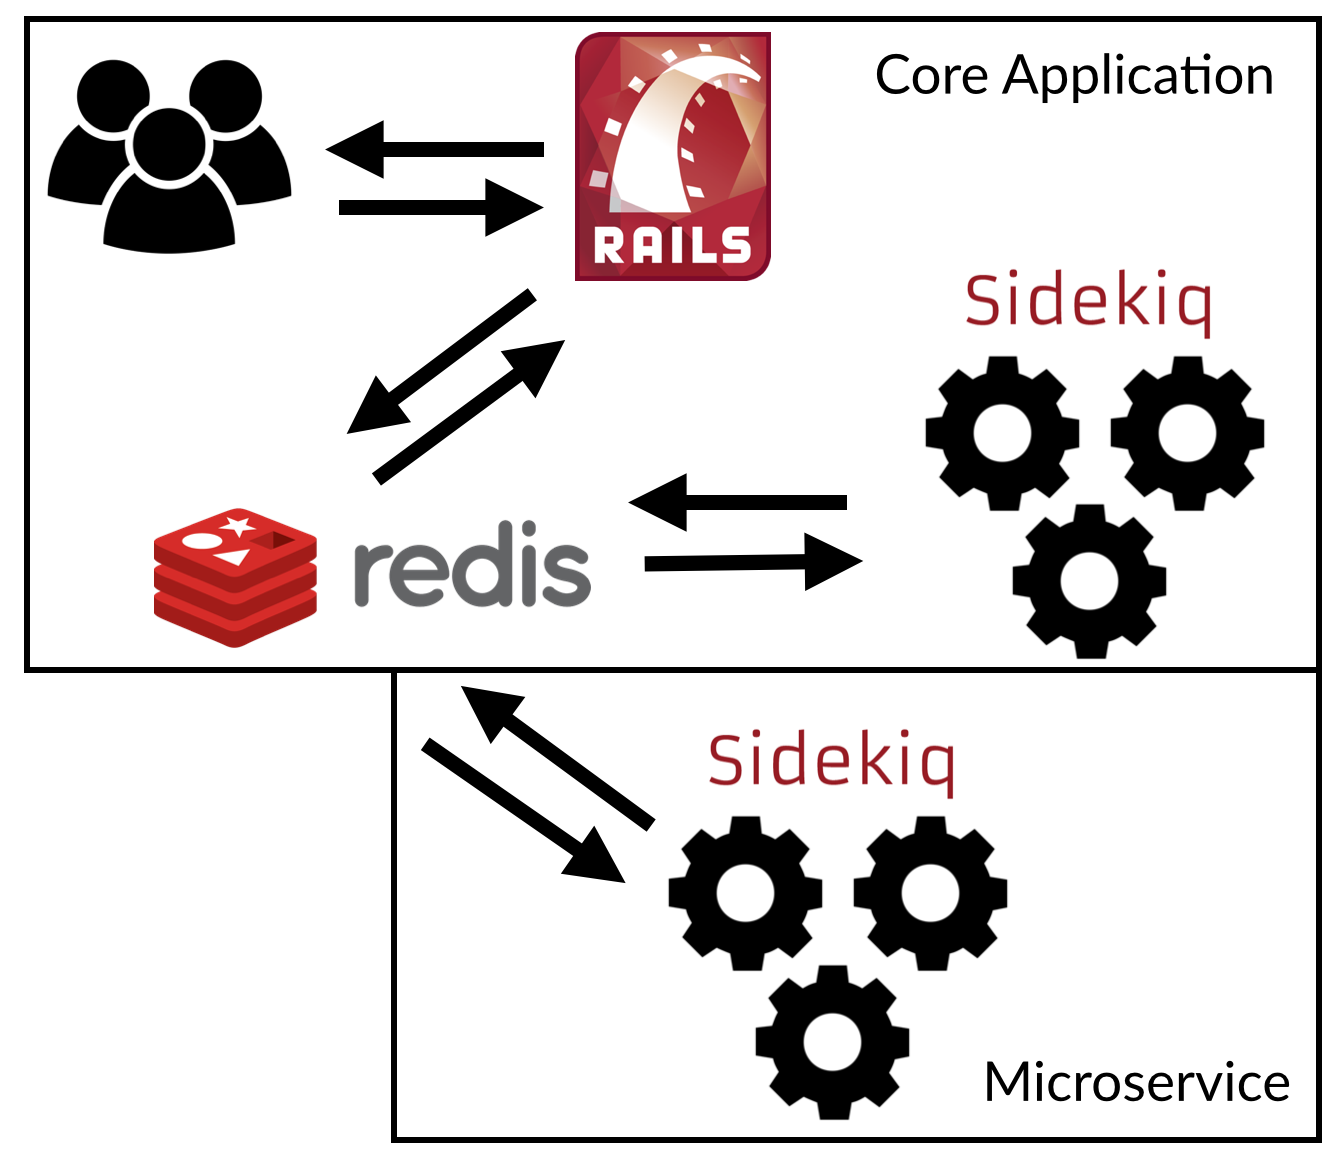 "Using Sidekiq as a Message Queue between two Rails microservices"